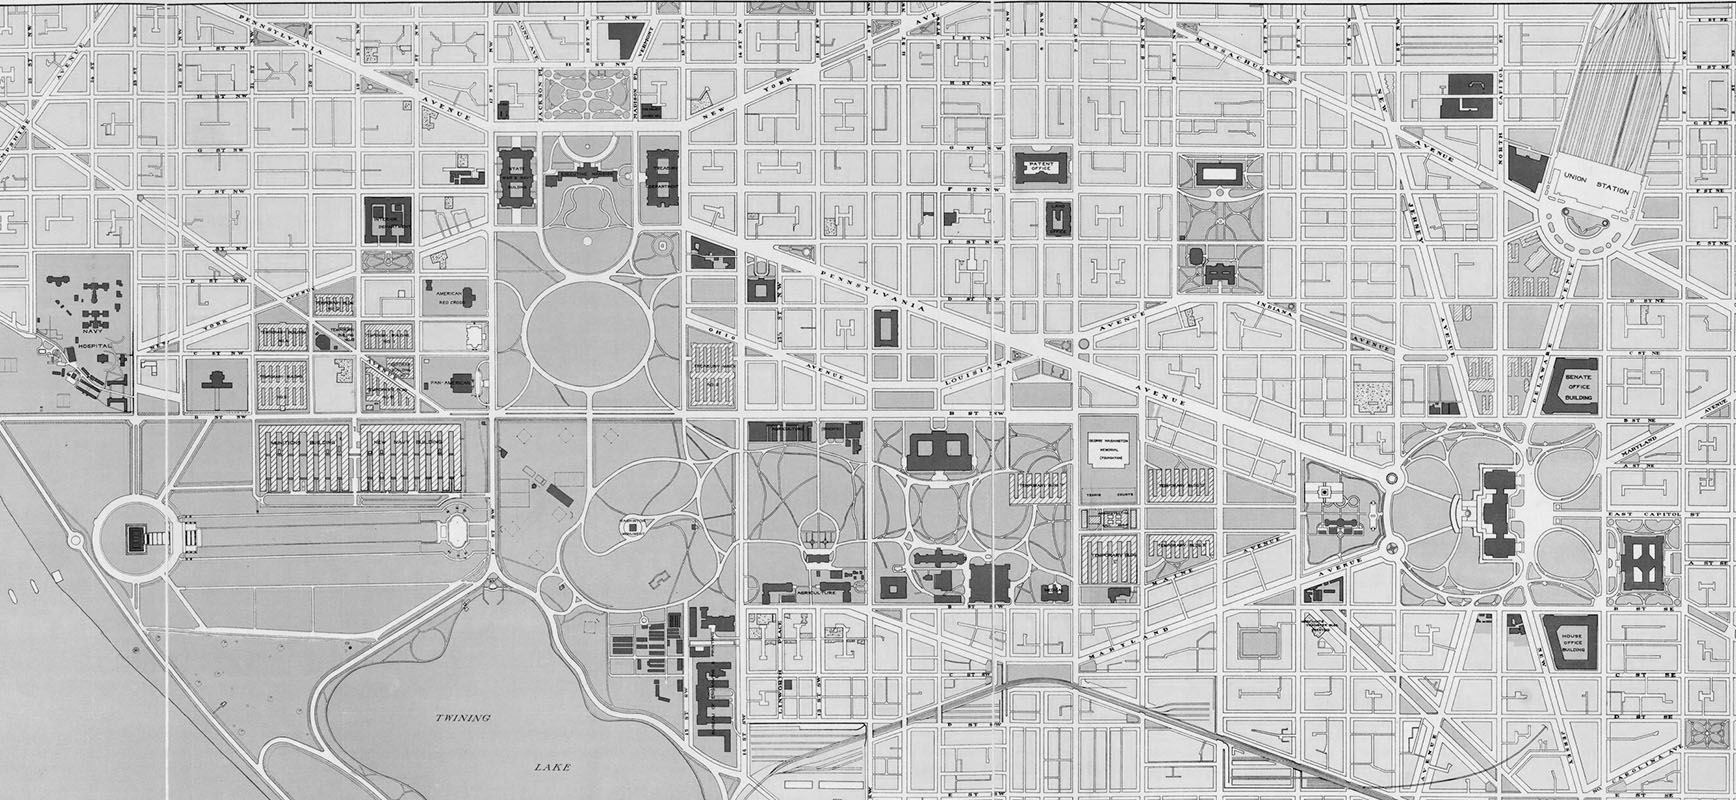 map of Capitol area of Washington DC, black and white, showing government buildings